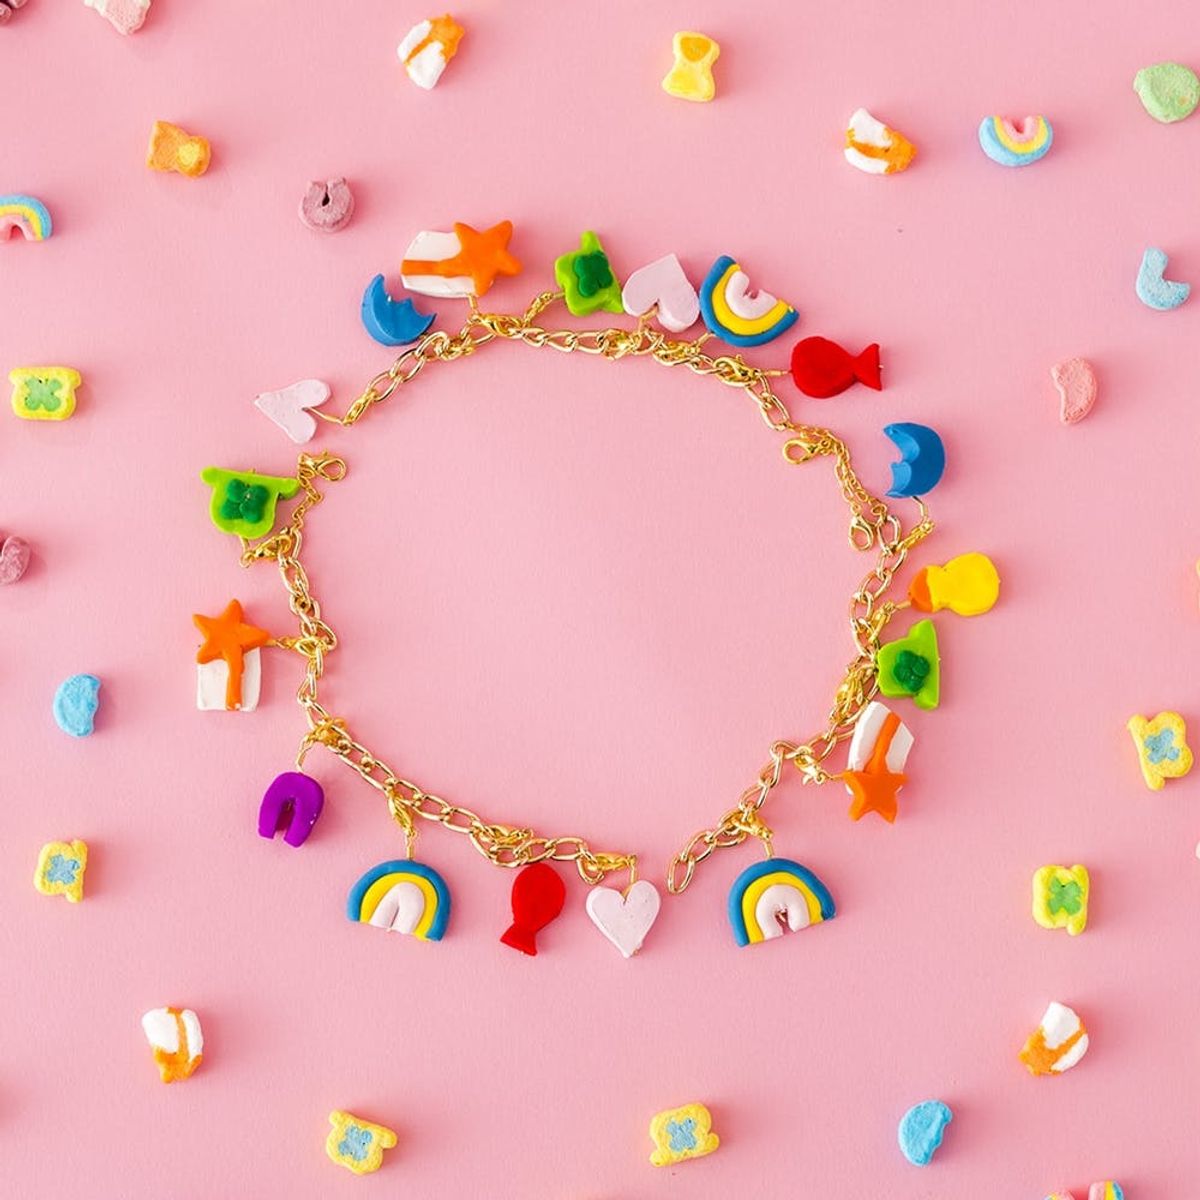 Make This Magically Easy Lucky Charms Bracelet for the Perfect St. Patrick’s Day Accessory